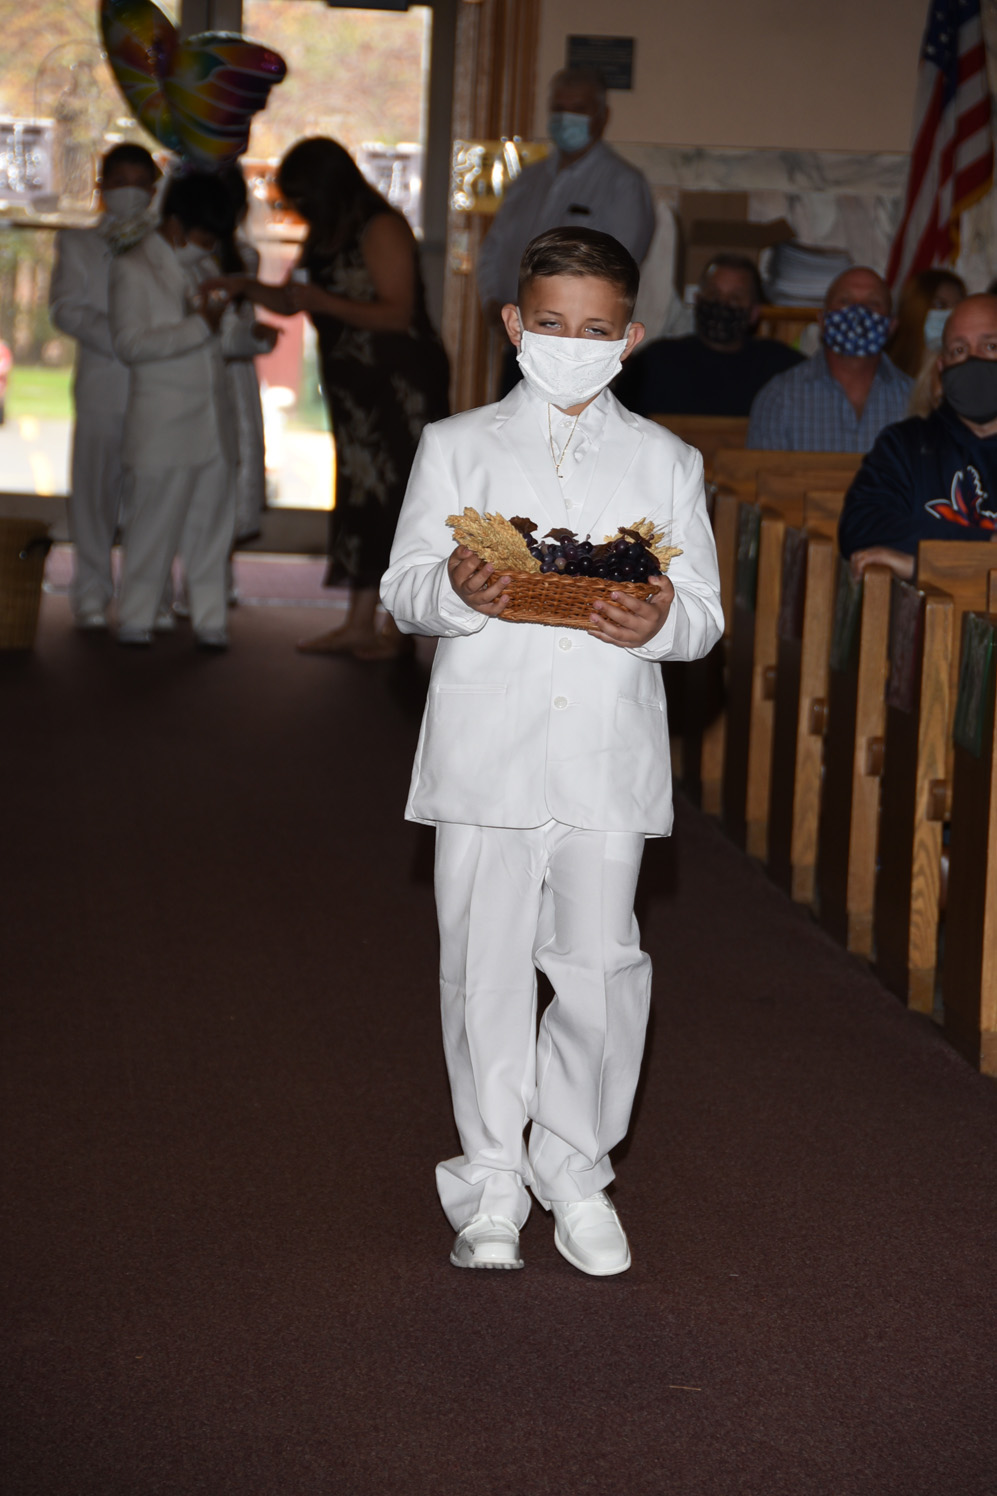 FIRST-COMMUNION-MAY-2-2021-1001001069